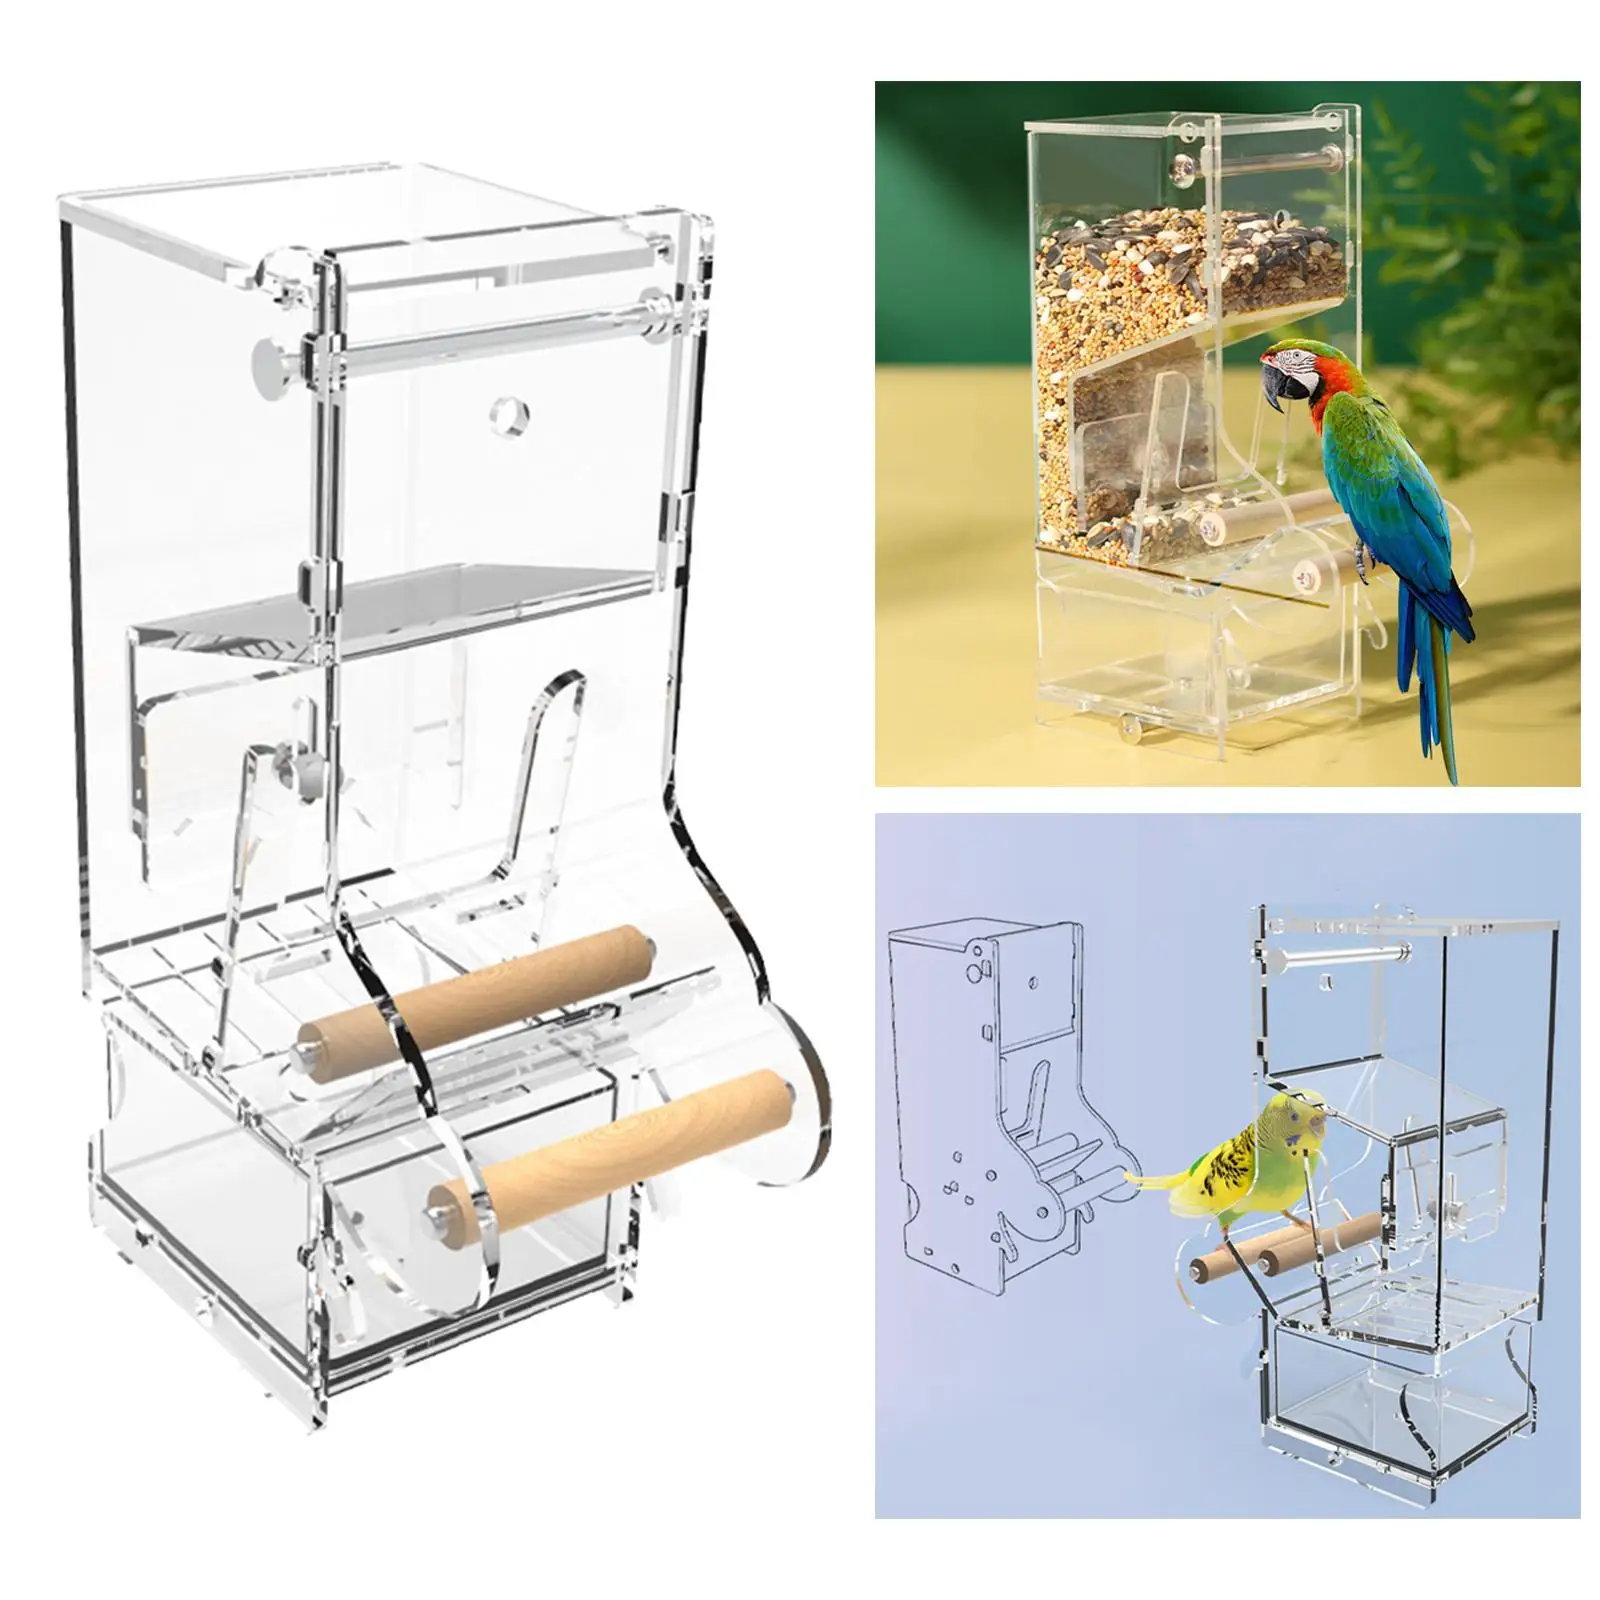 Bird Feeder Cage Hanging Clean Seed Food Container with Perch for Canary